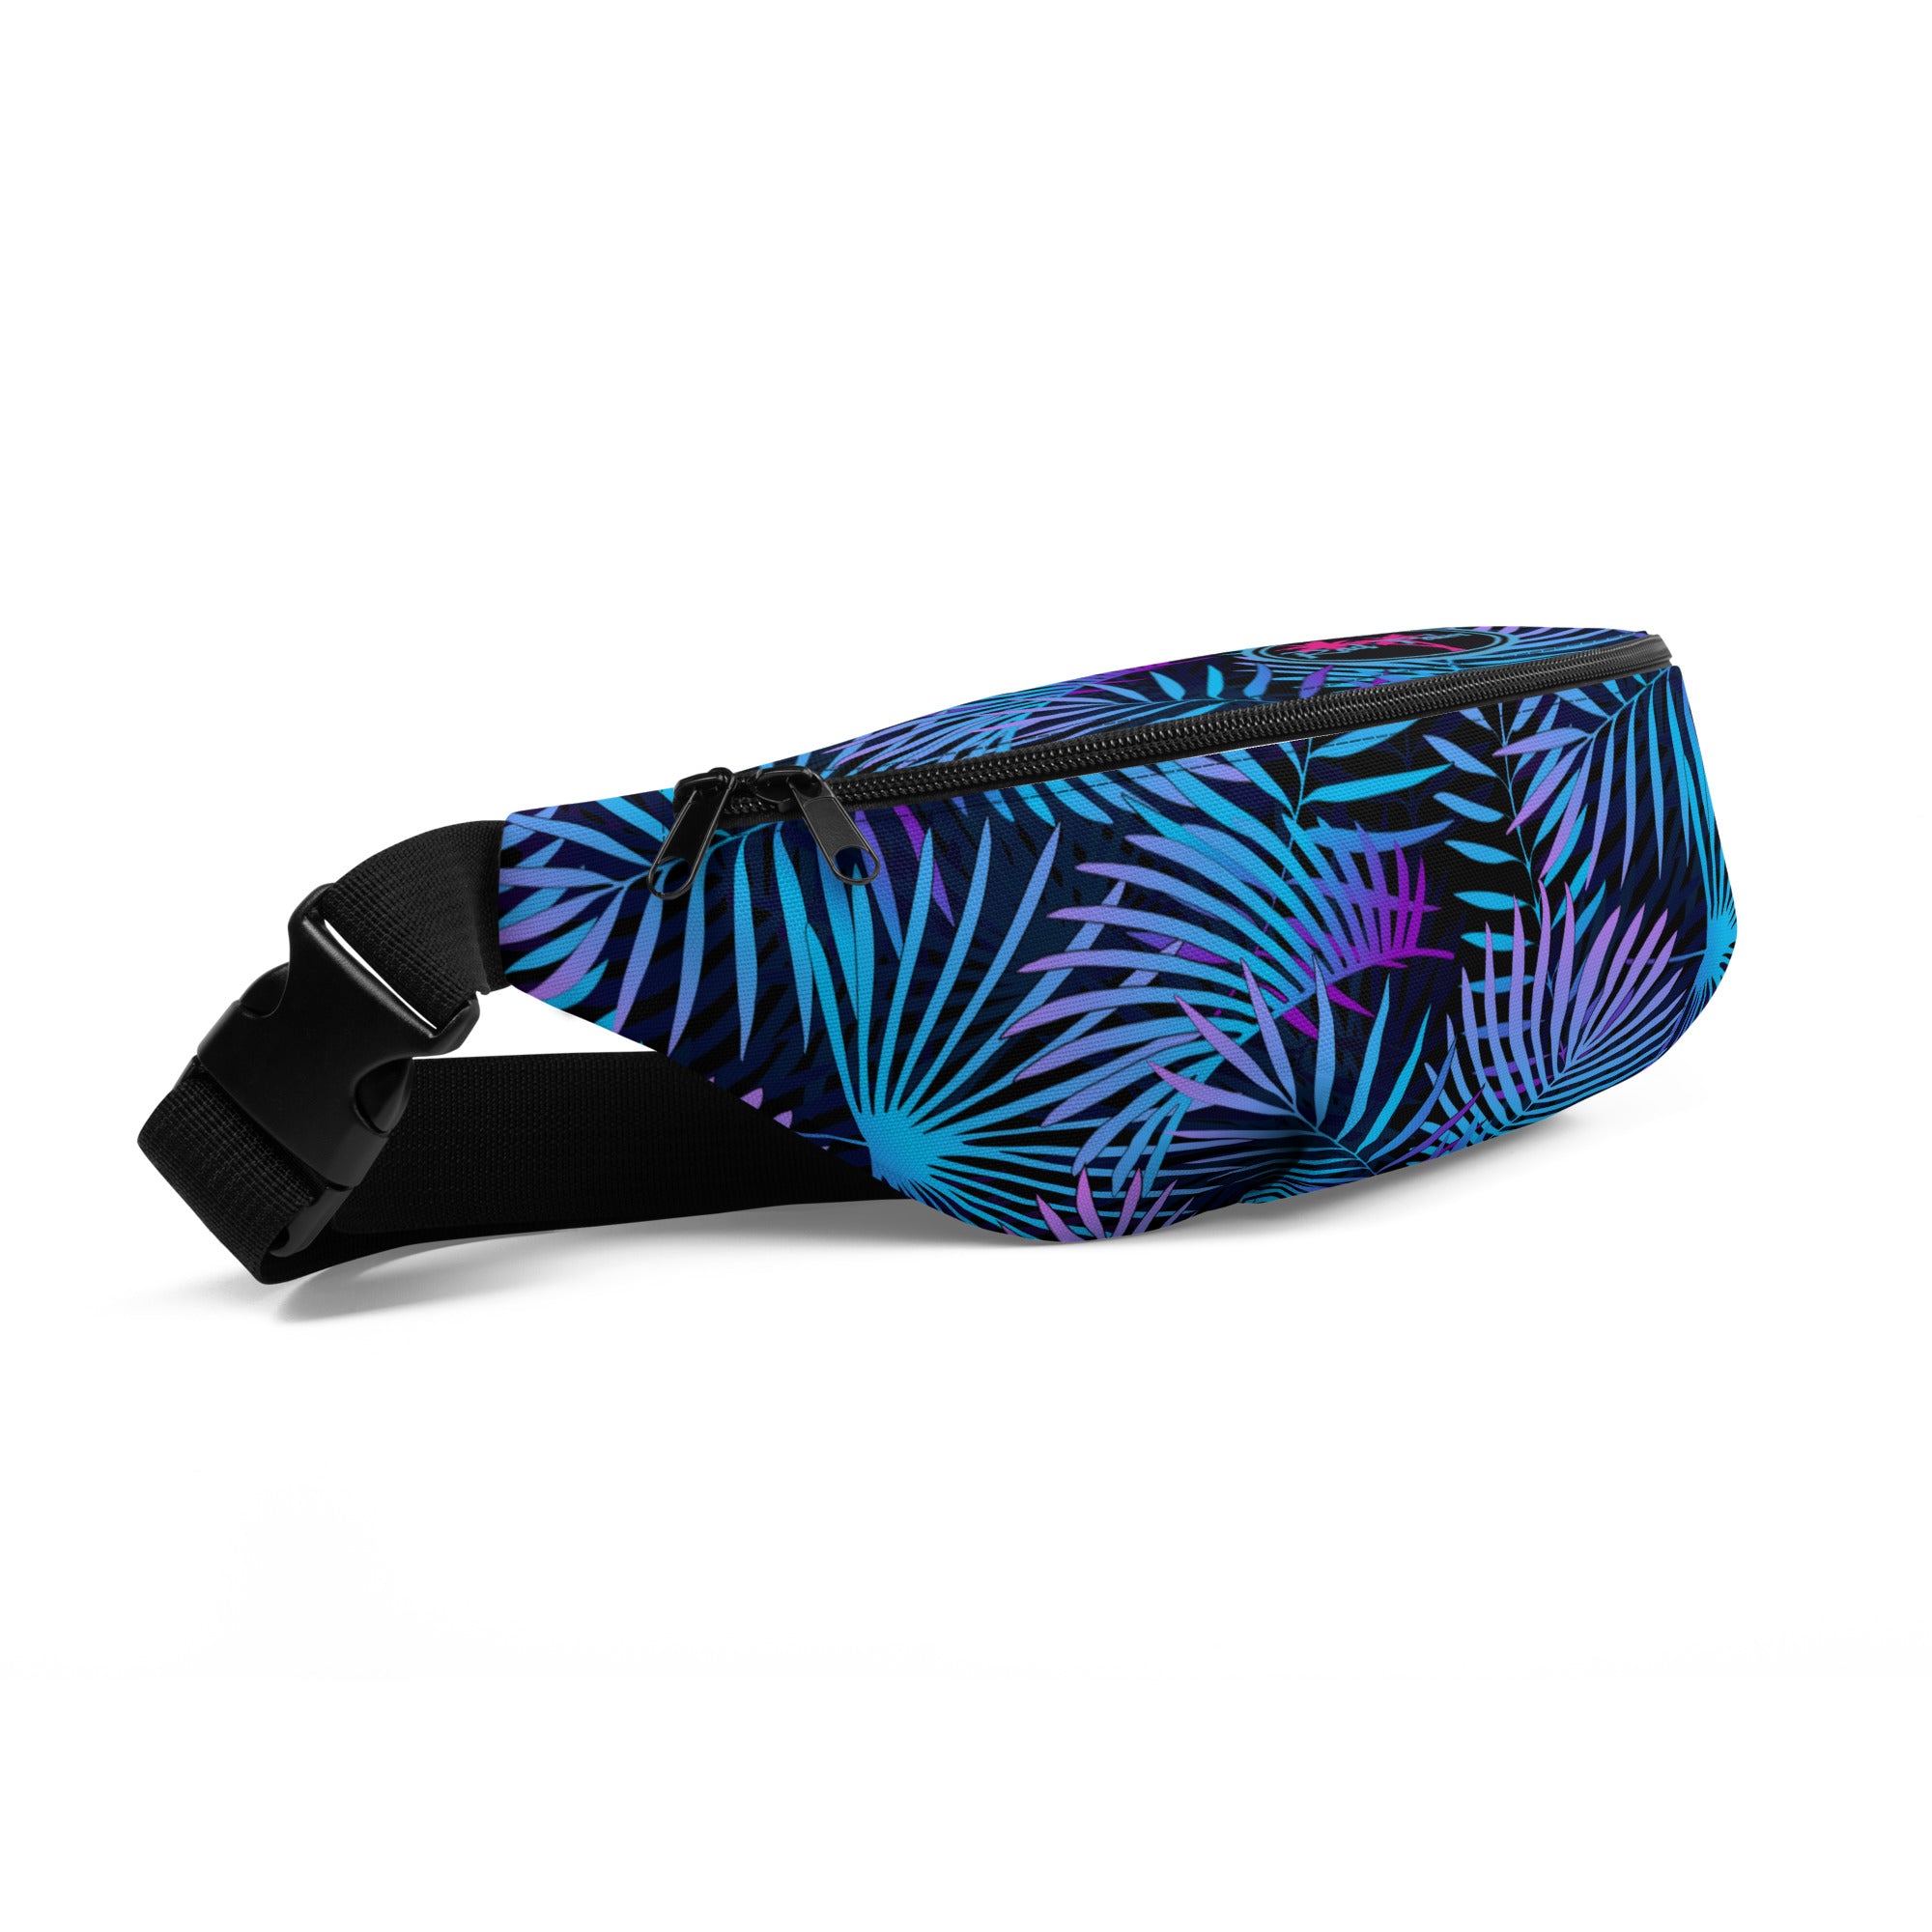 The Night Life Fanny Pack